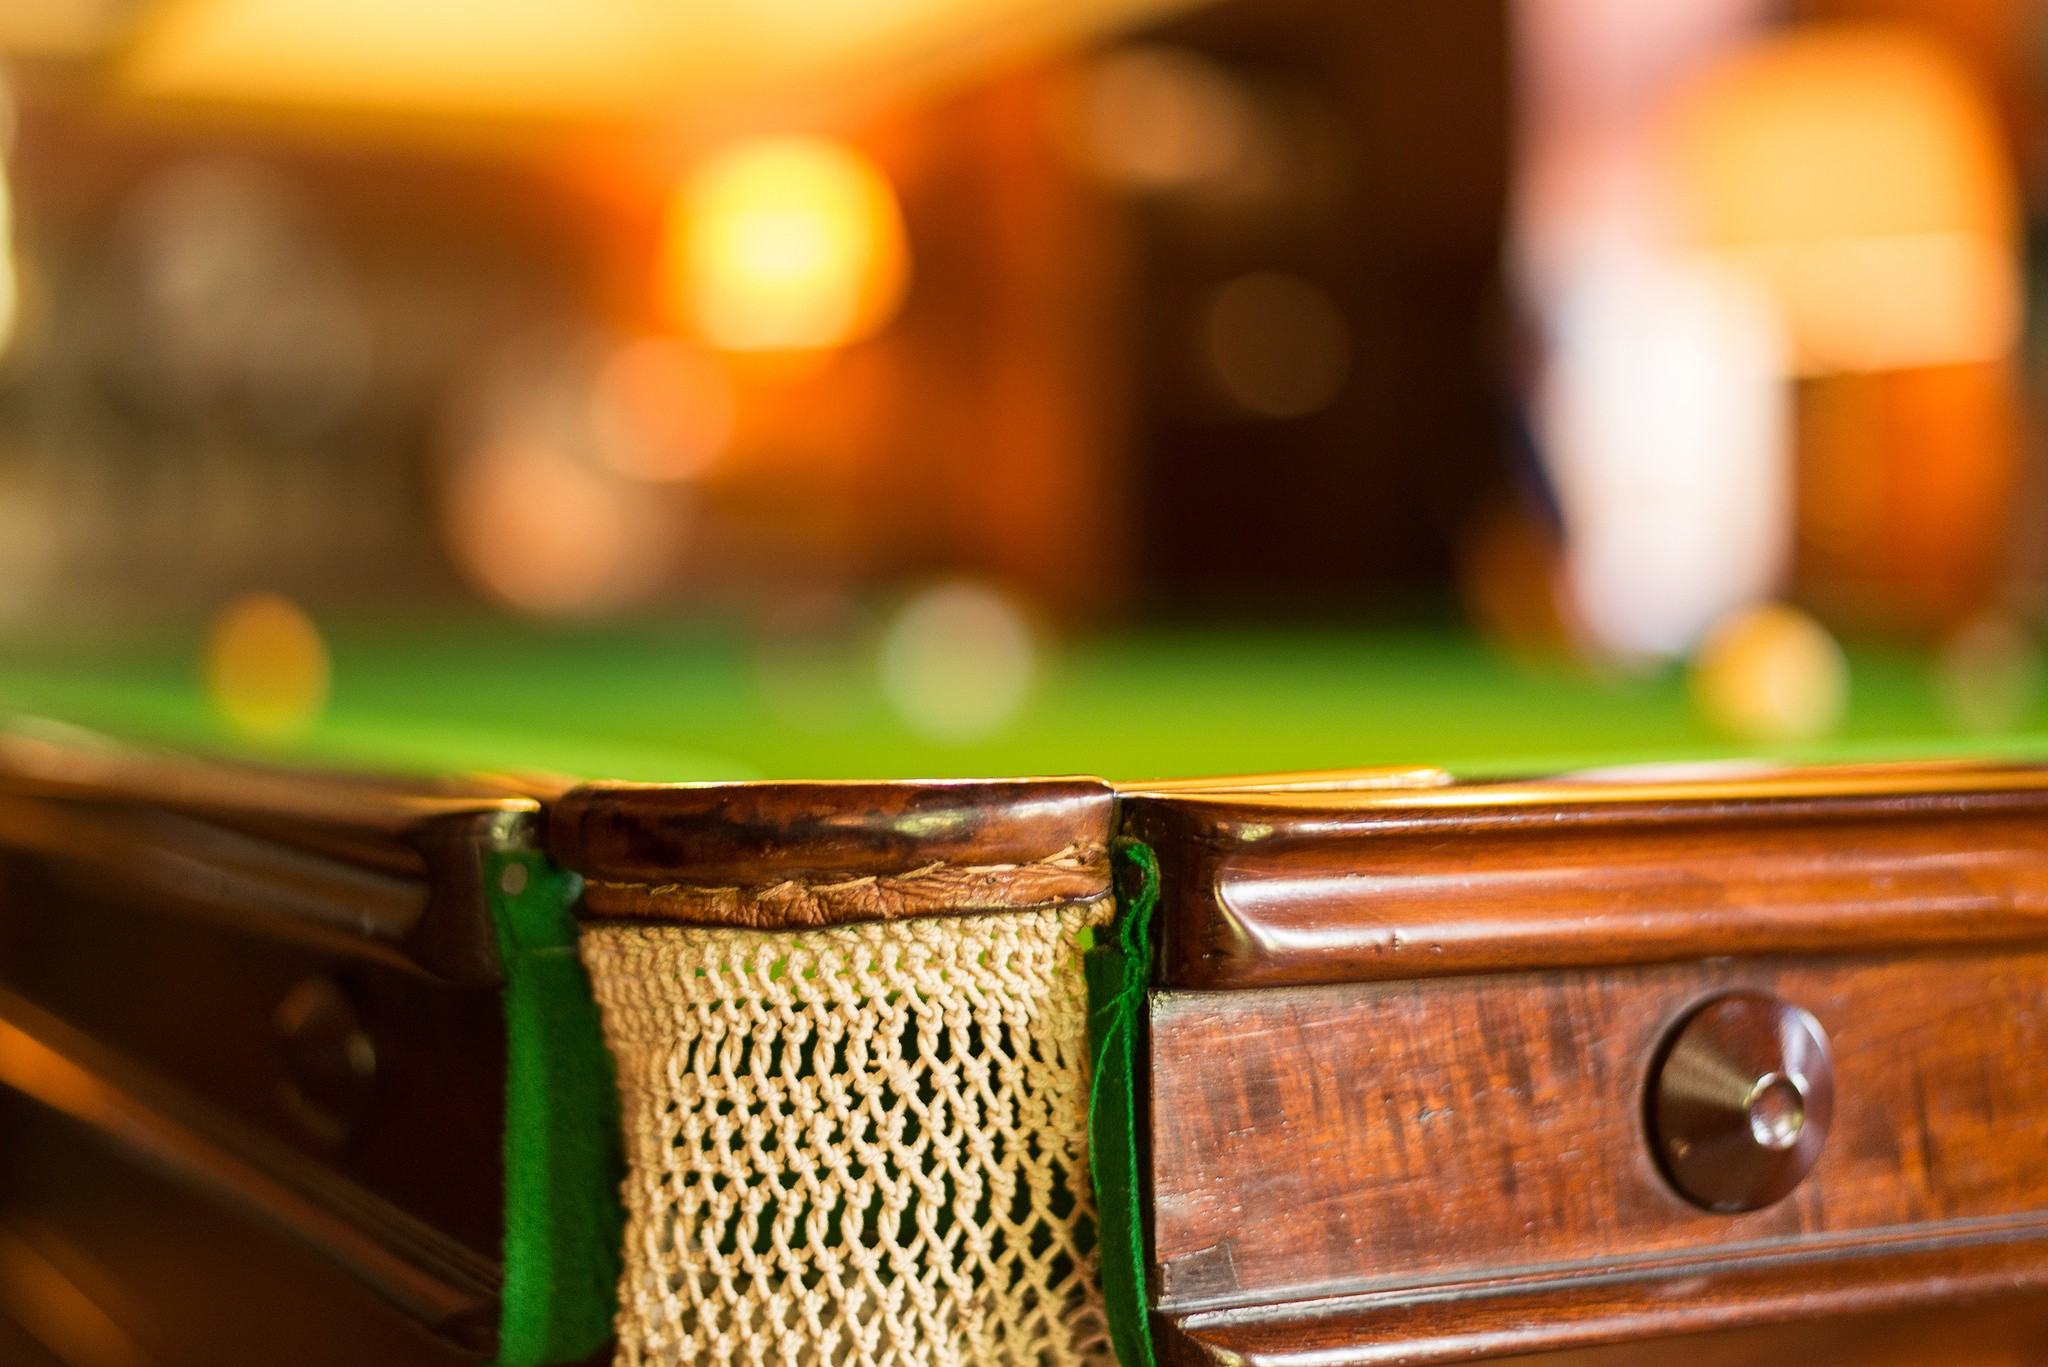 Bokeh Blurred Depth Of Field Sports Snooker Table Wood Pool Table Baskets Ball Indoors Cloth 2048x1367